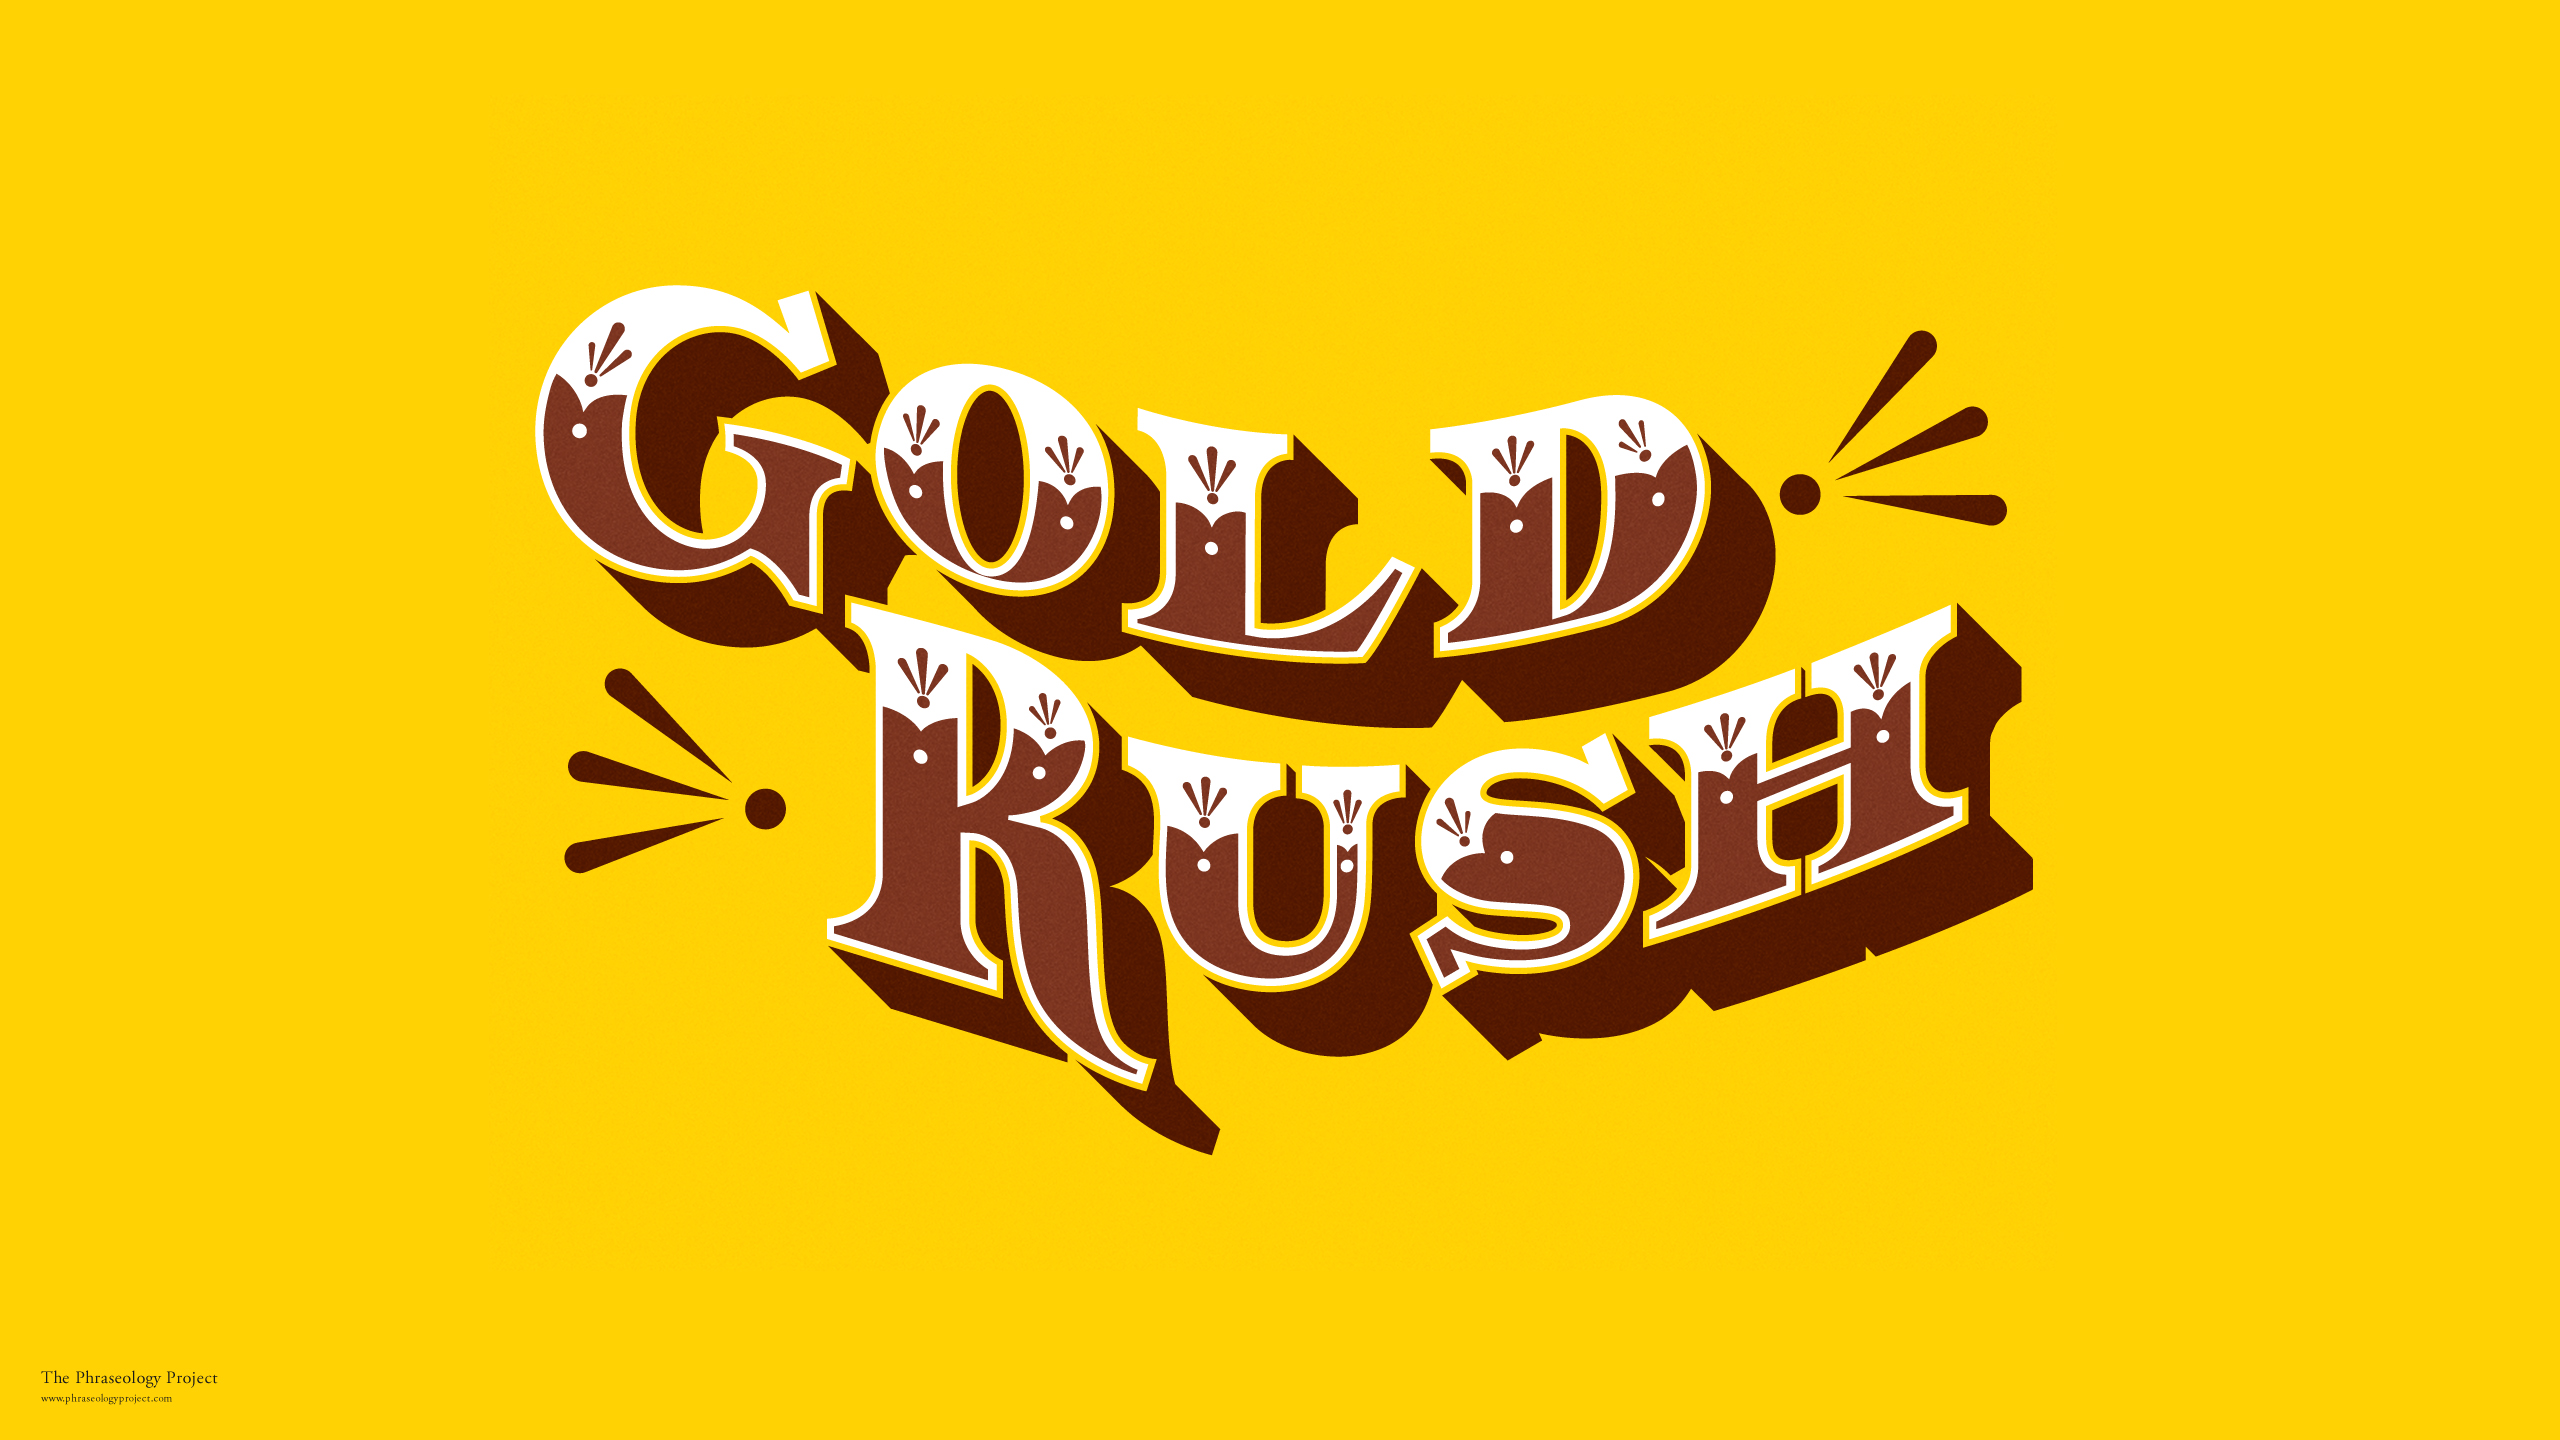 Gold rush, Ancient egypt and 